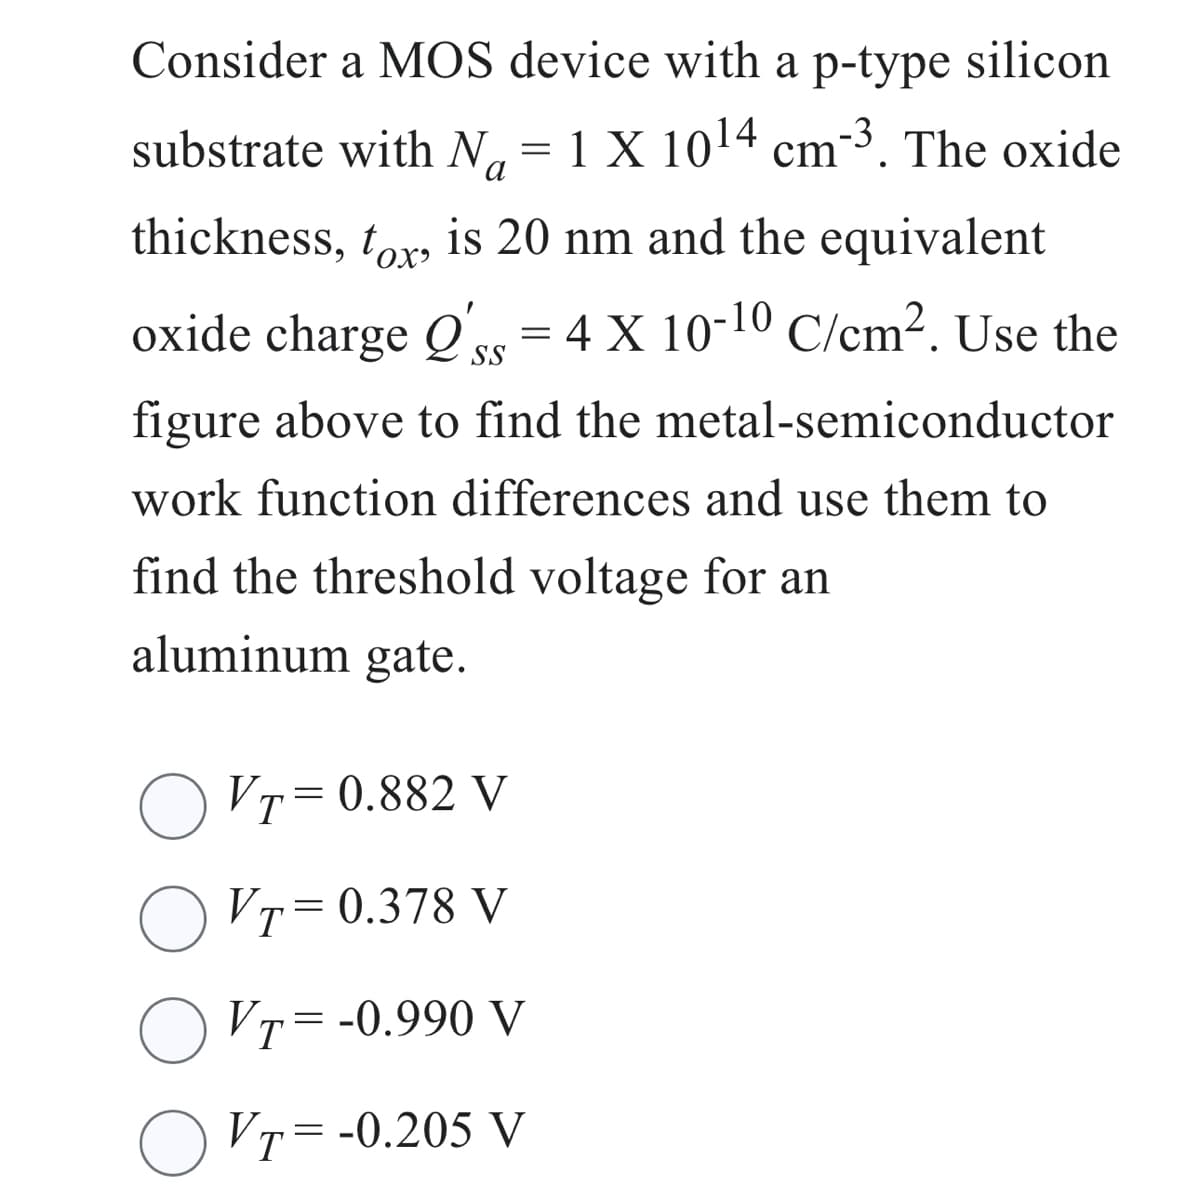 Consider a MOS device with a p-type silicon
substrate with N = 1 X 10¹4 cm-³. The oxide
Na
thickness, tox, is 20 nm and the equivalent
oxide charge Qs = 4 X 10-10 C/cm². Use the
'ss
figure above to find the metal-semiconductor
work function differences and use them to
find the threshold voltage for an
aluminum gate.
VT=0.882 V
O VT=0.378 V
OVT = -0.990 V
OVT = -0.205 V